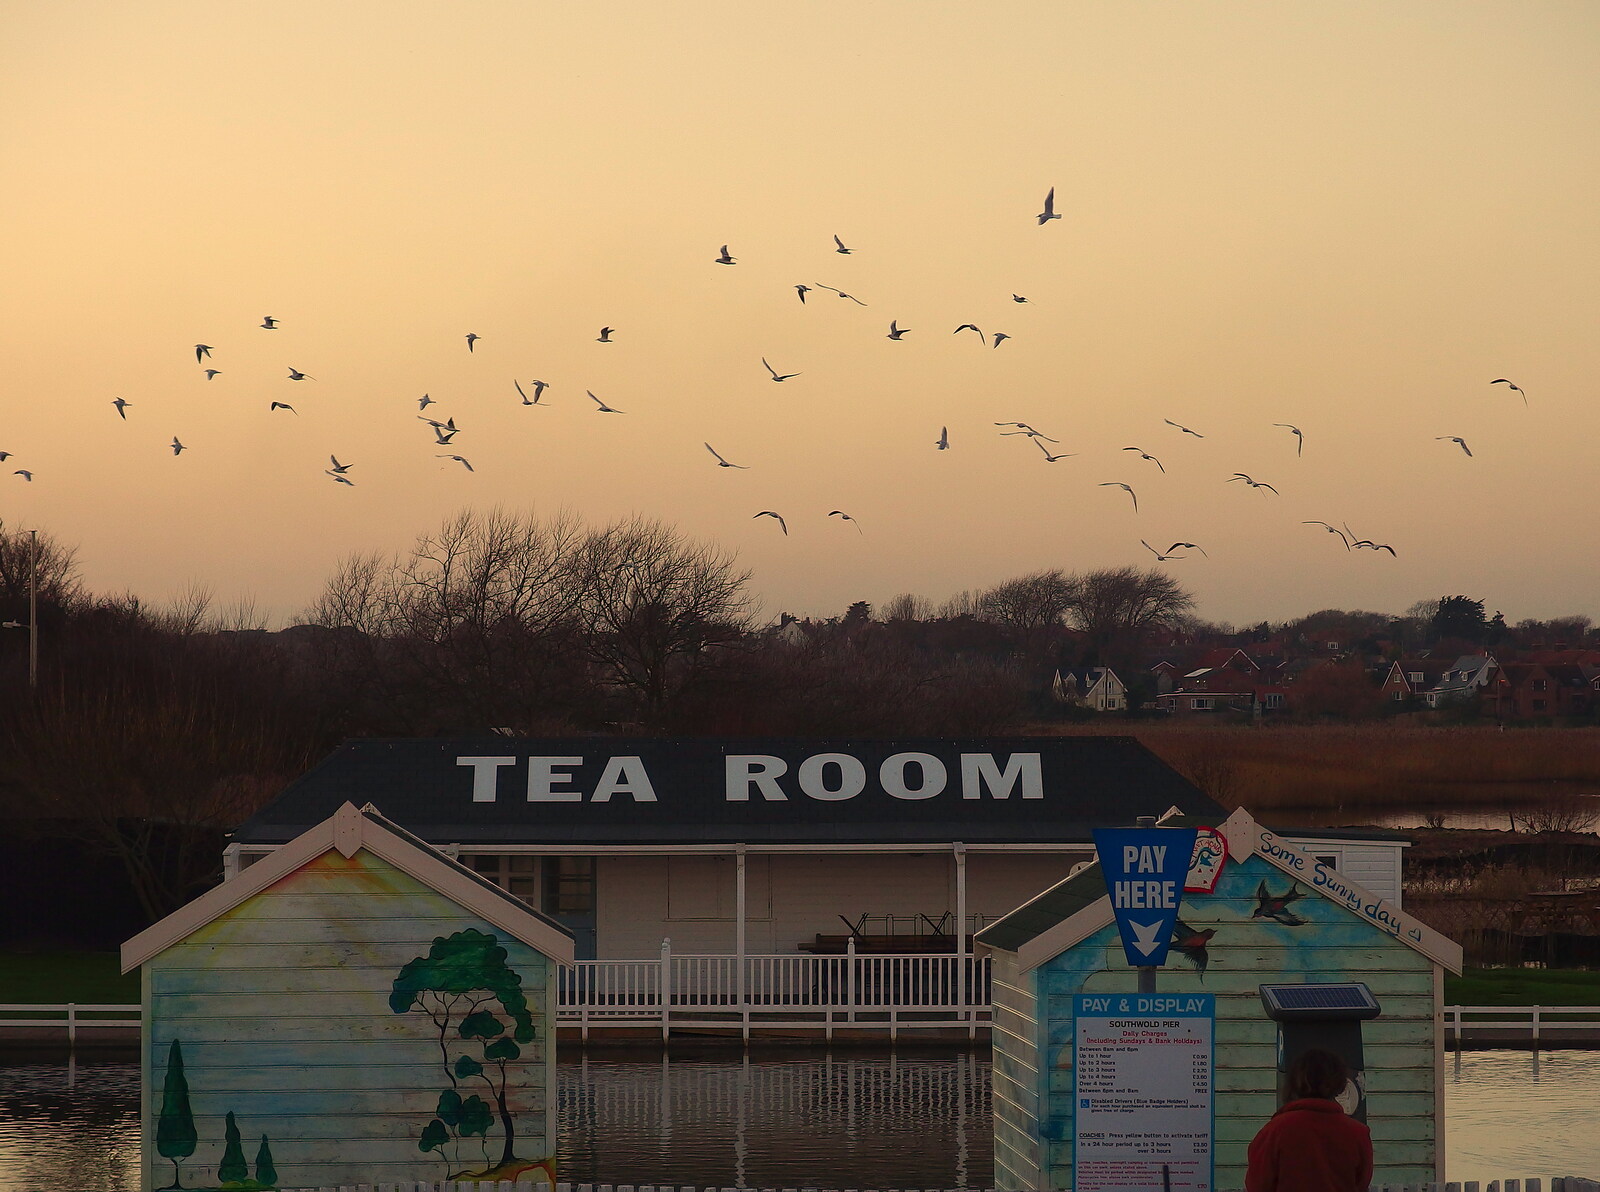 Birds take flight over the Tea Room from Post-Christmas Southwold, Suffolk - 29th December 2013